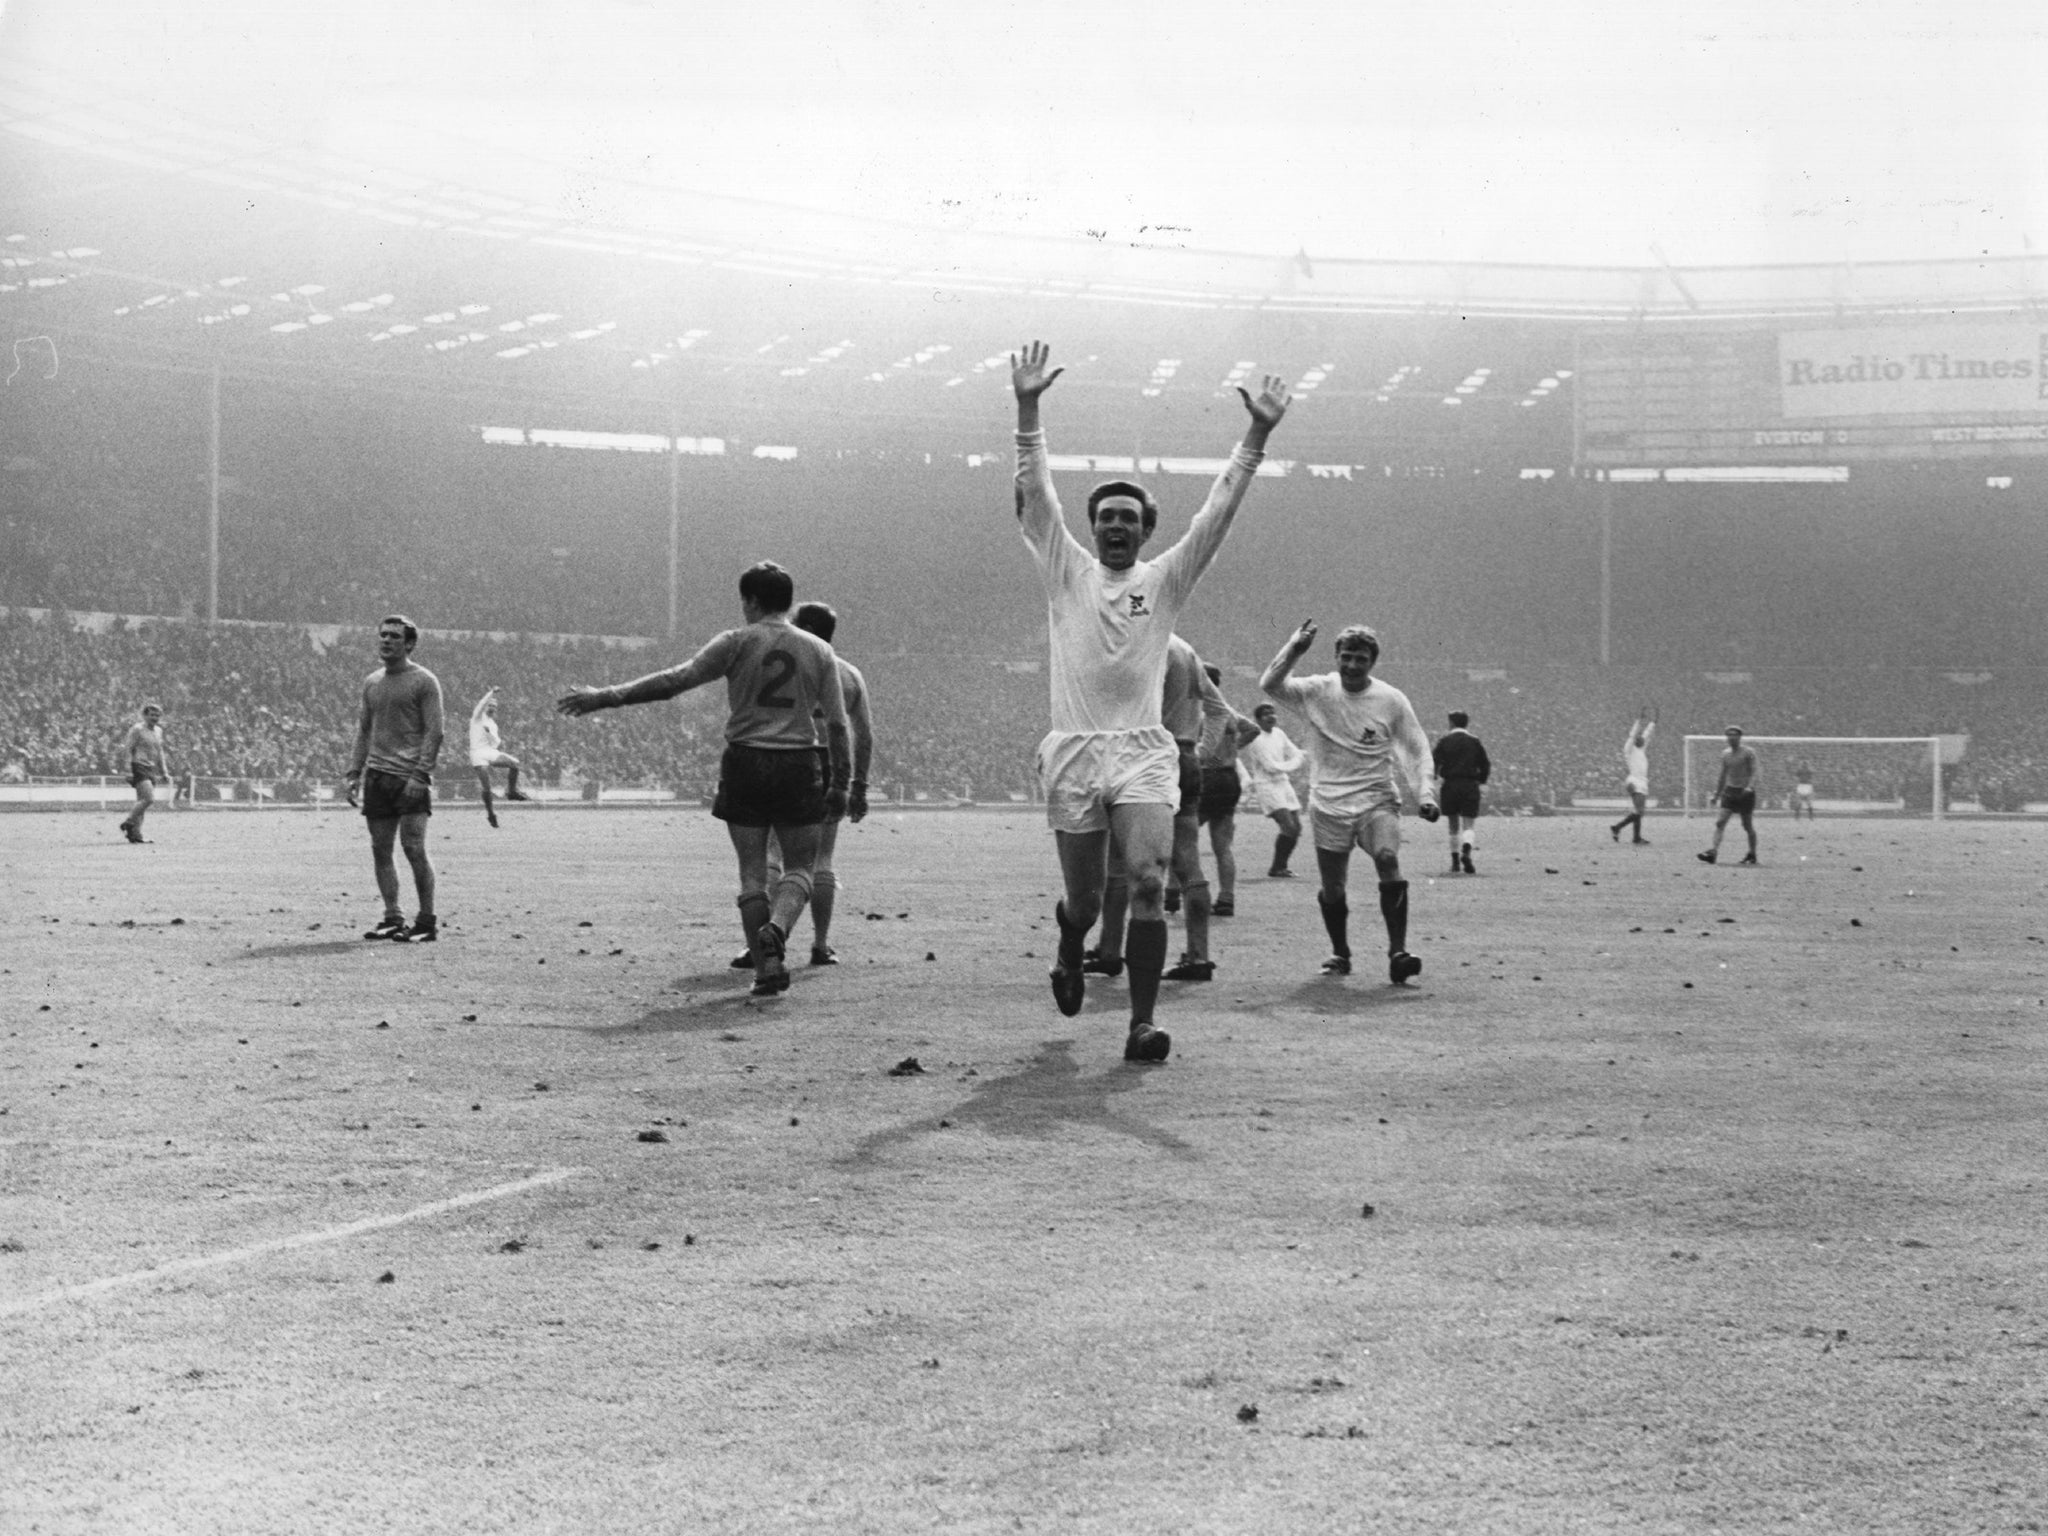 Jeff Astle raises his arms in victory after scoring the winning goal in West Brom's 1-0 win over Everton after extra time in the 1968 FA Cup final